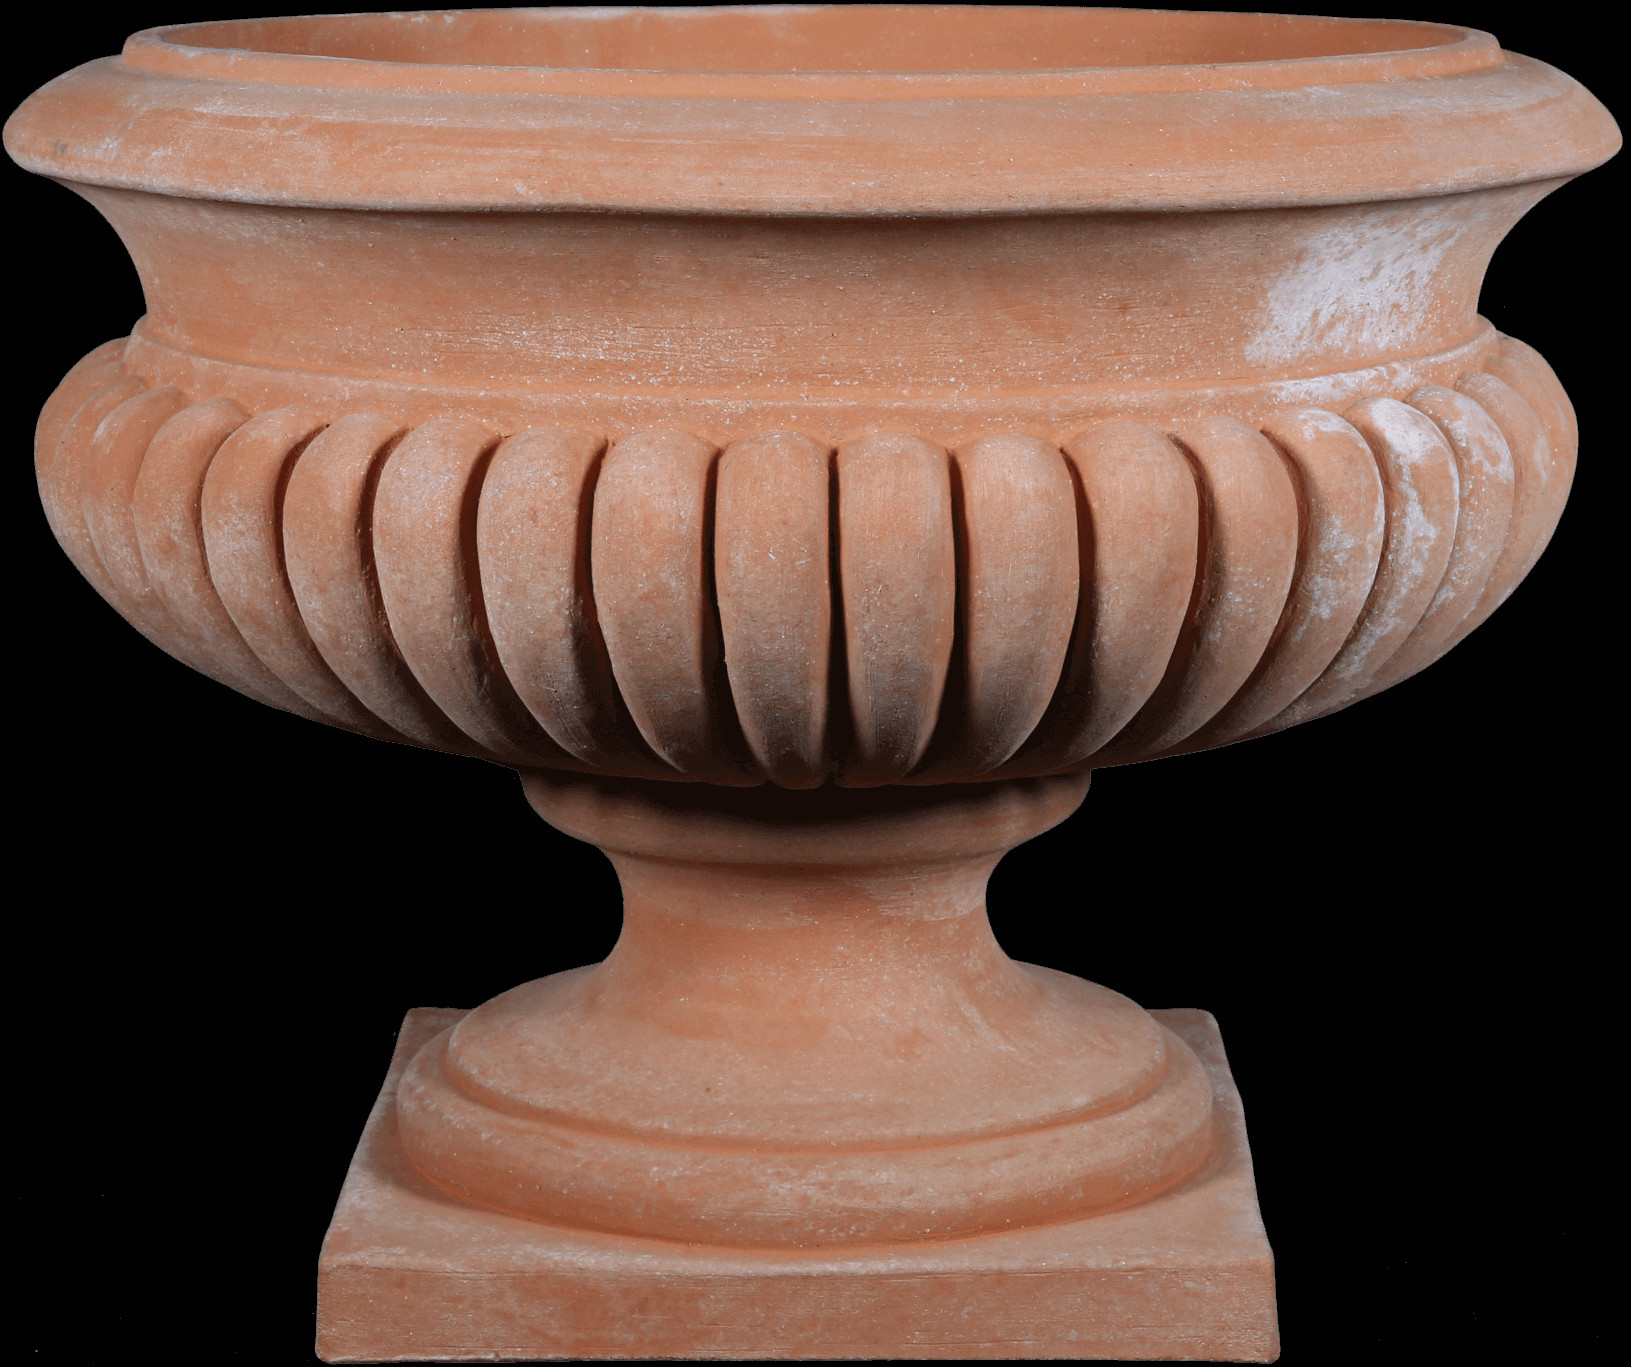 26 Elegant Small Terra Cotta Vases 2024 free download small terra cotta vases of terracotta urns orci jars from impruneta tuscan imports within f631